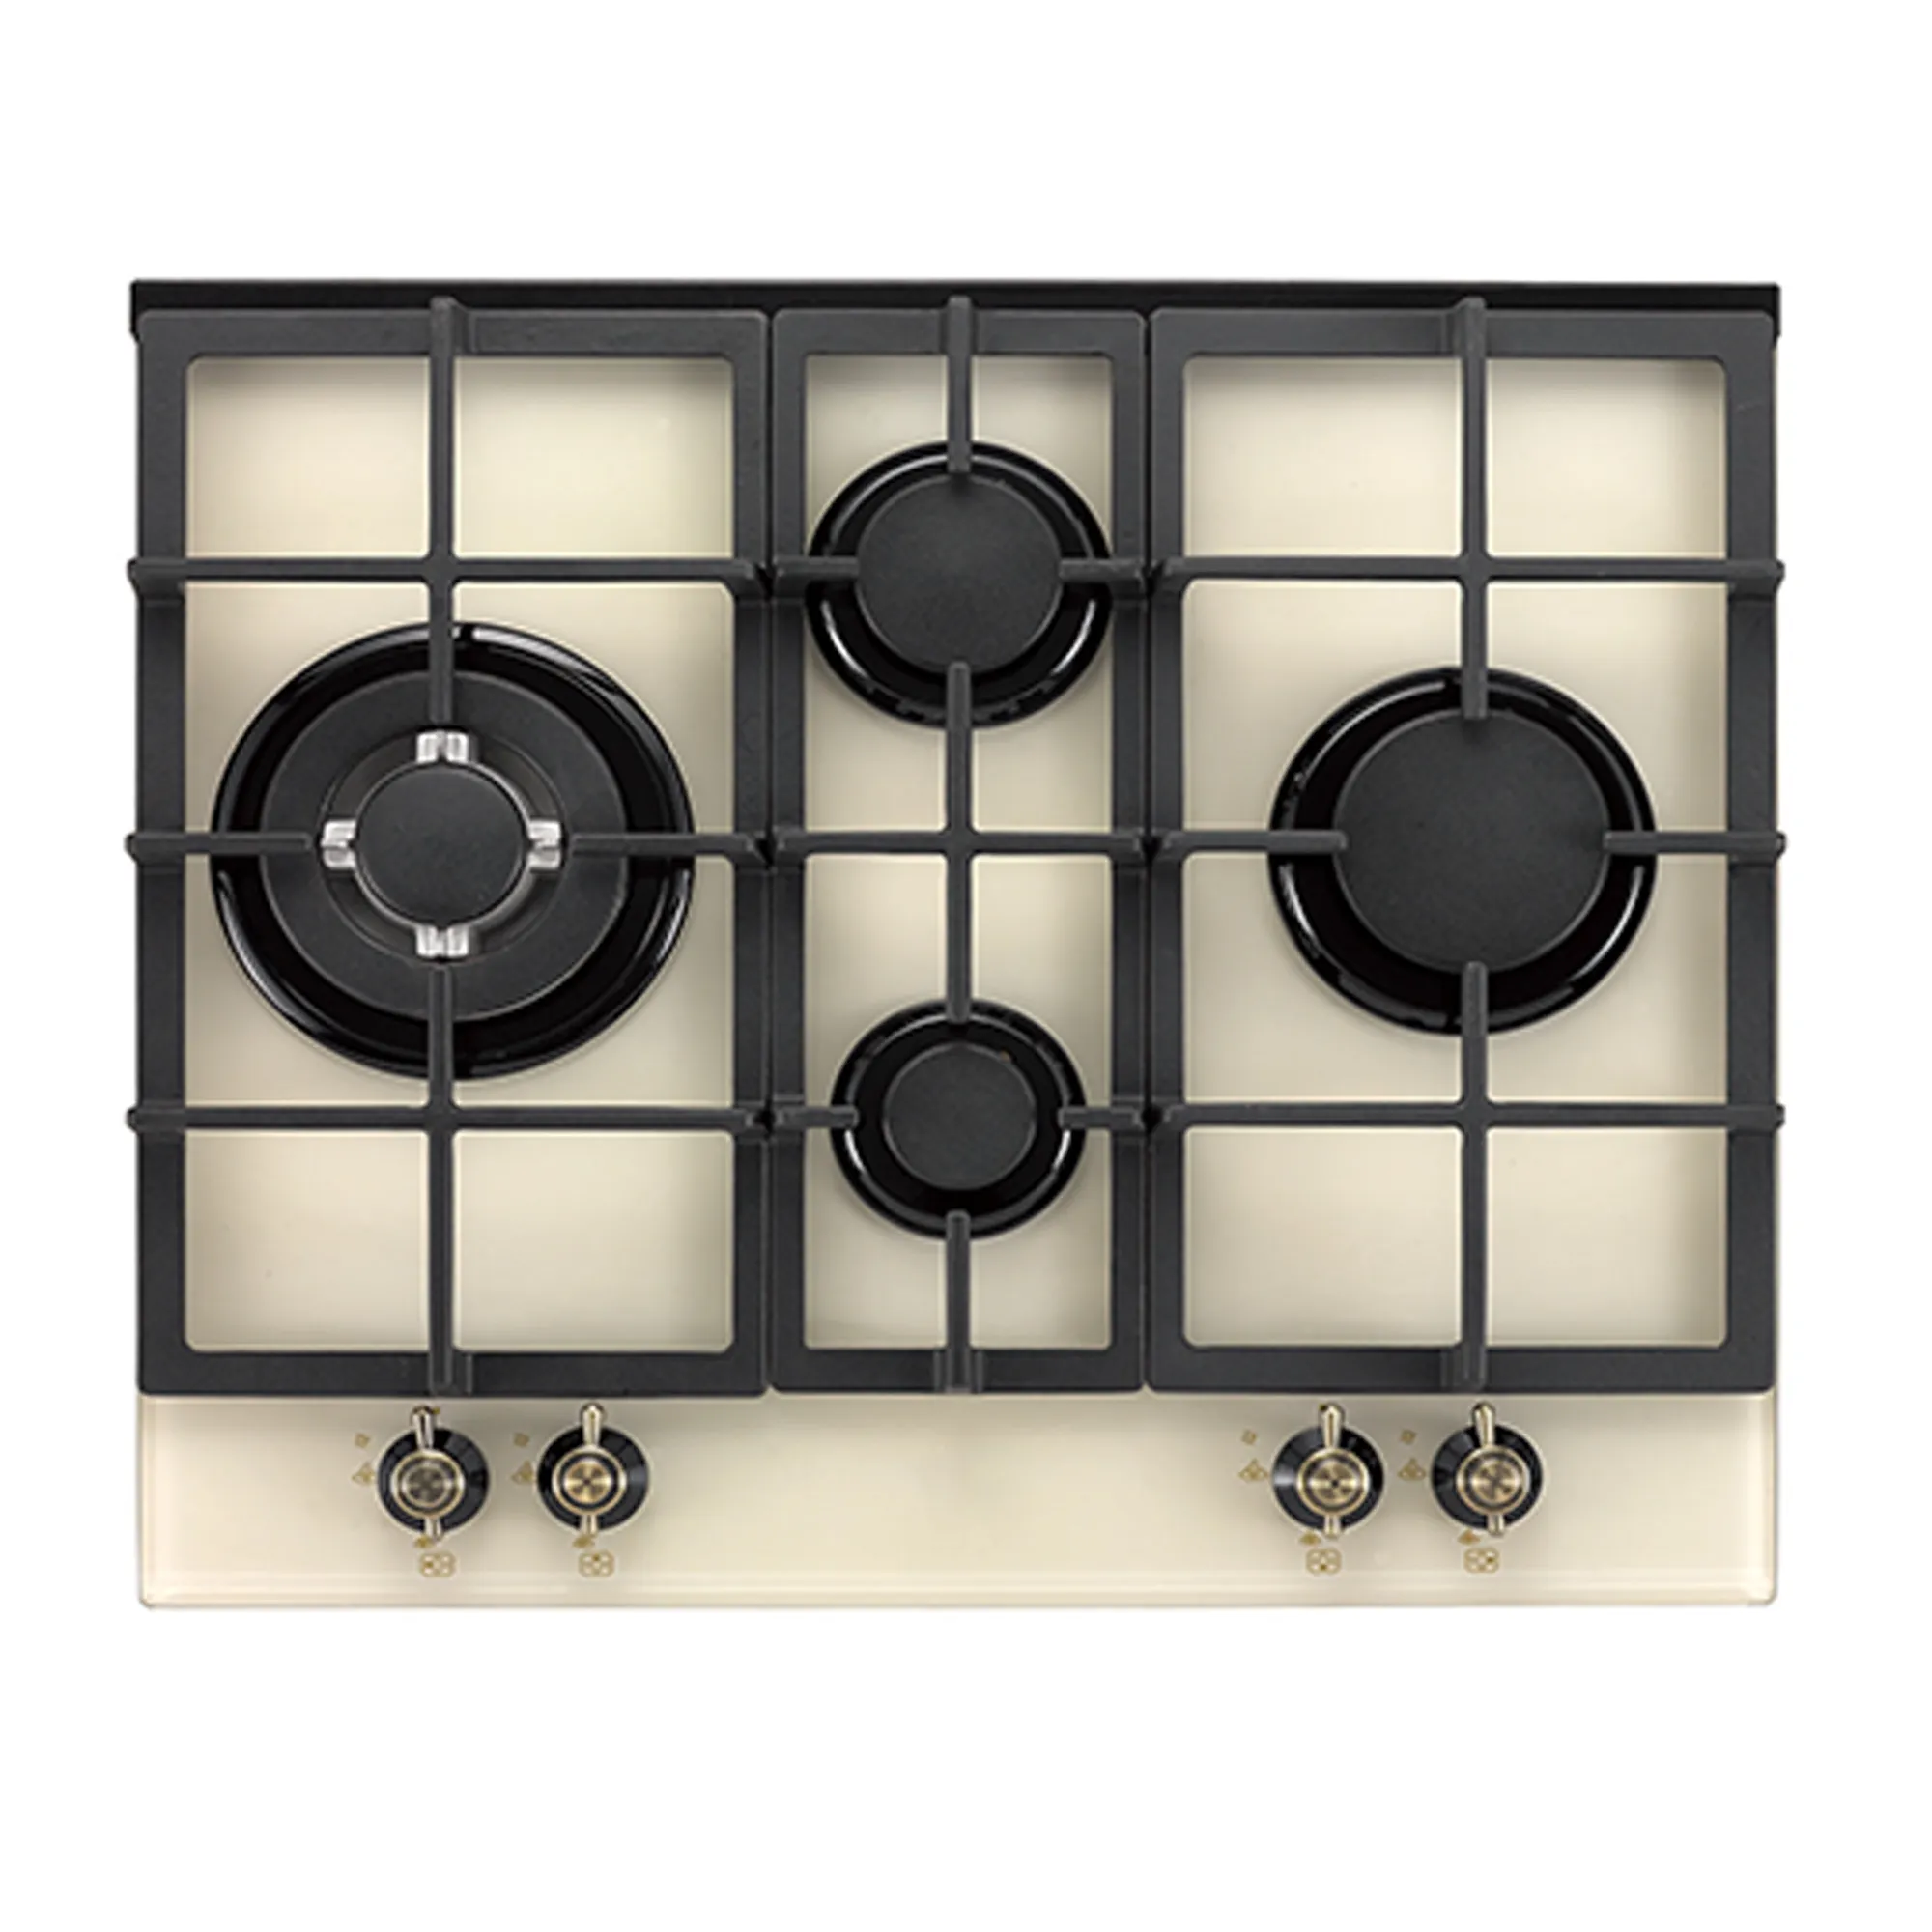 2022 Foshan Good quality Built in 4 burners retro Glass Gas Stove electric ceramic induction cooktops cooker Ivory